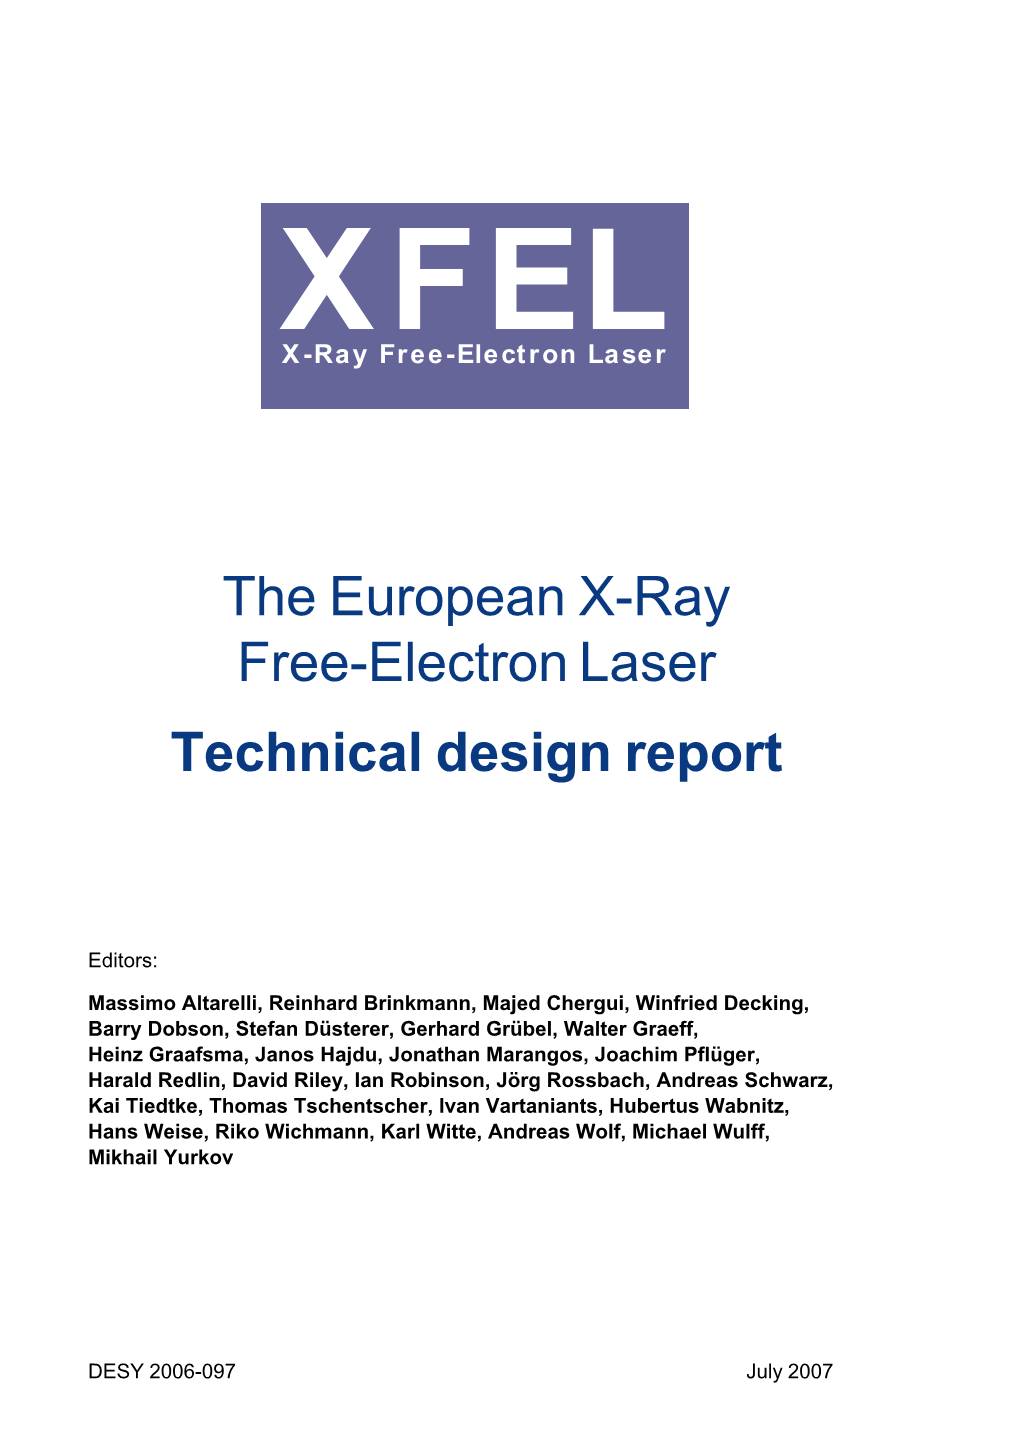 The European X-Ray Free-Electron Laser Technical Design Report